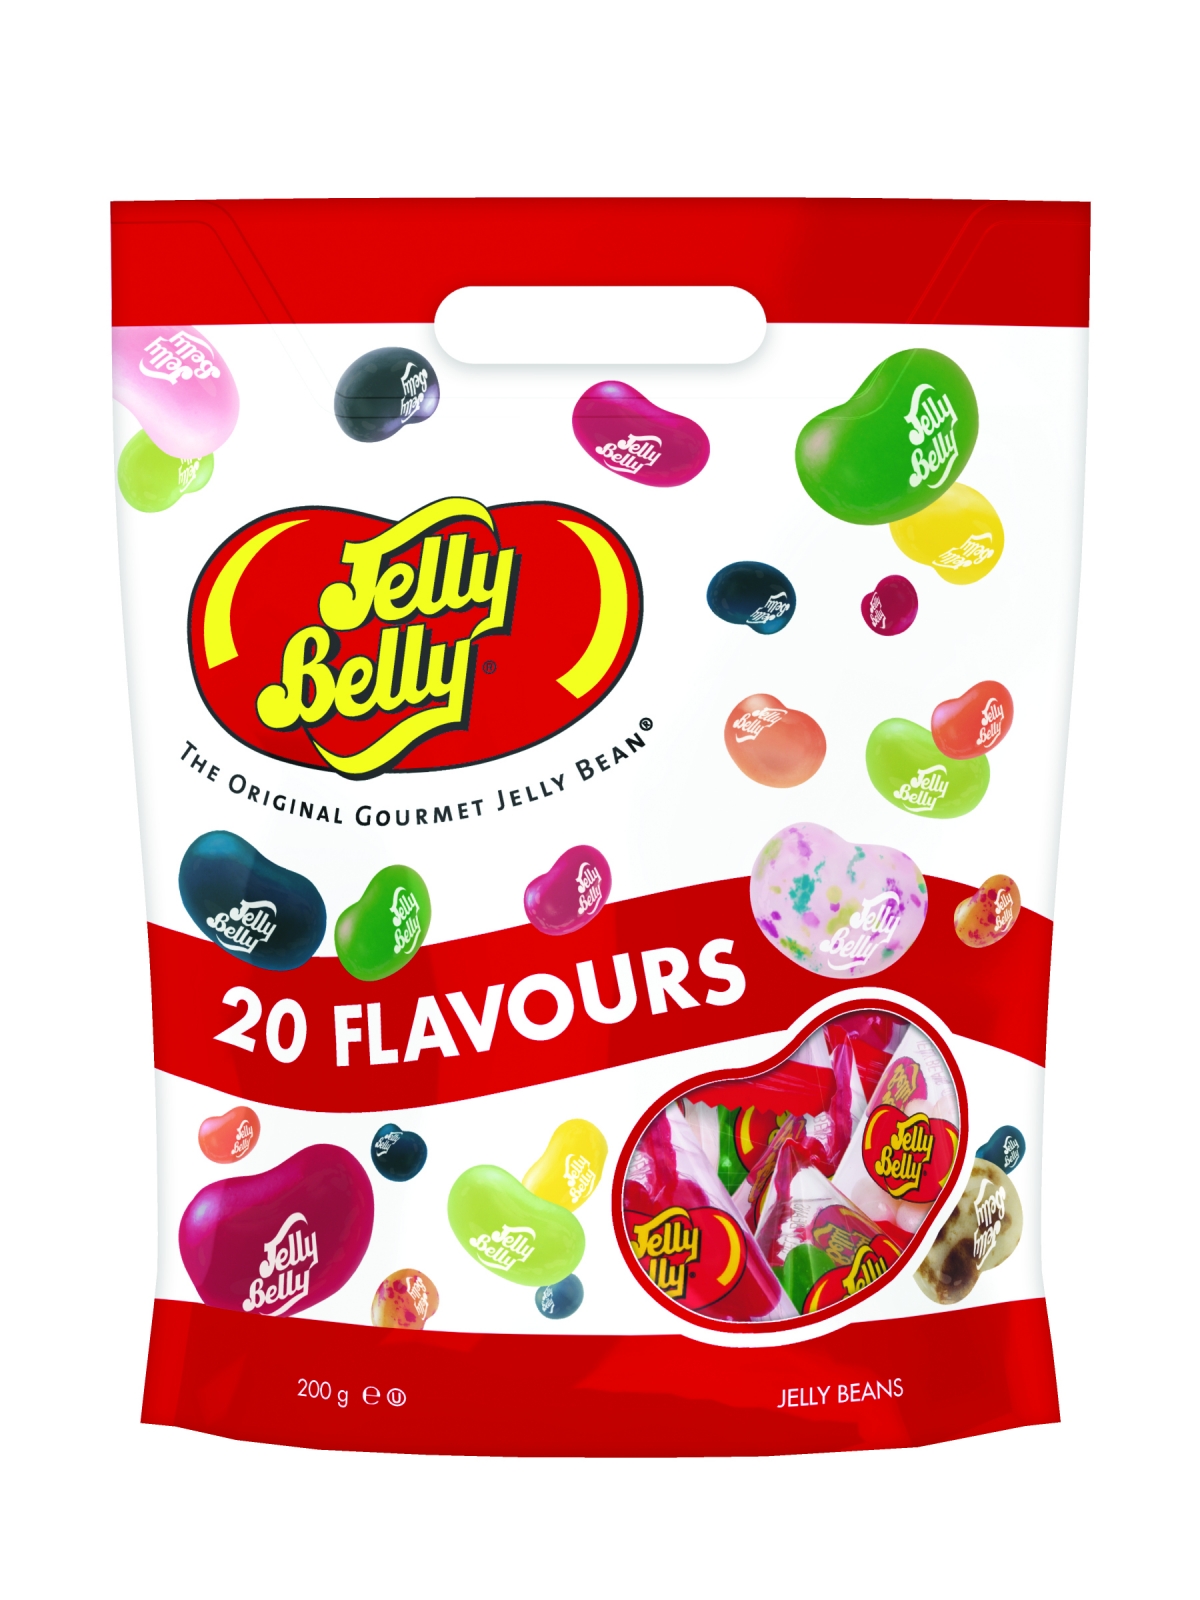 Jelly Belly Gifts and fun treats